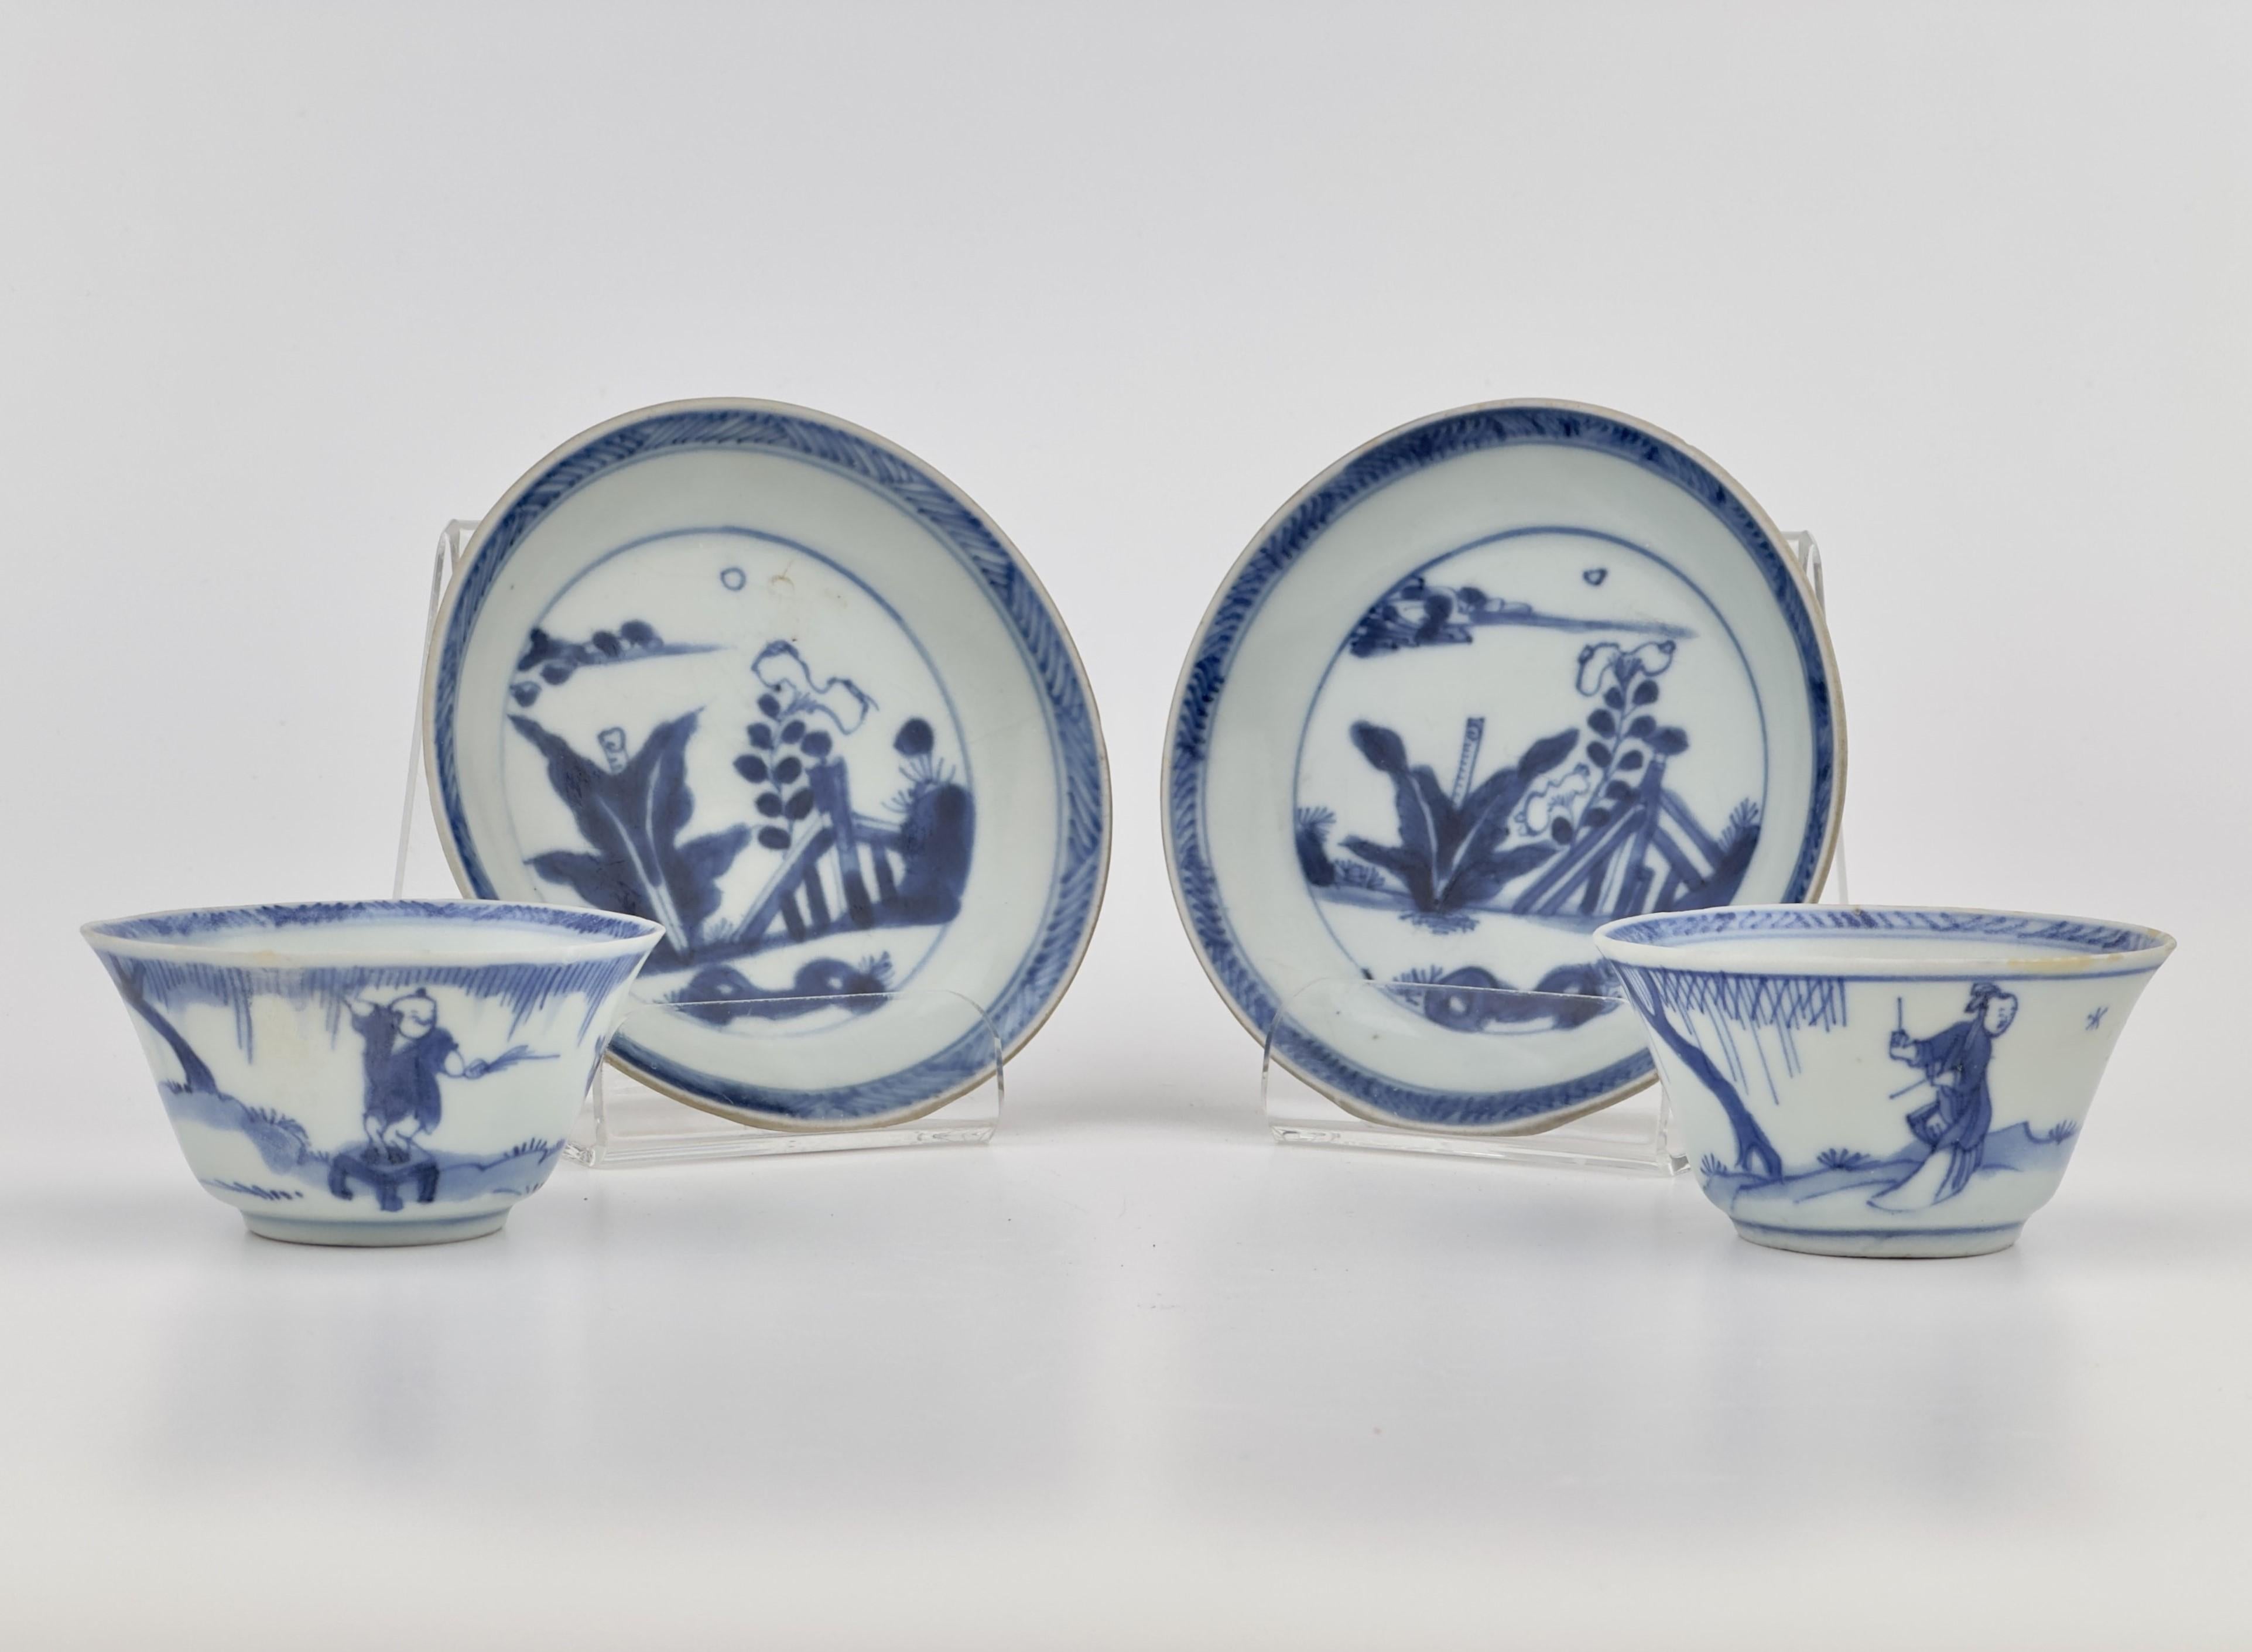 Blue and White Tea Set c 1725, Qing Dynasty, Yongzheng Reign For Sale 6